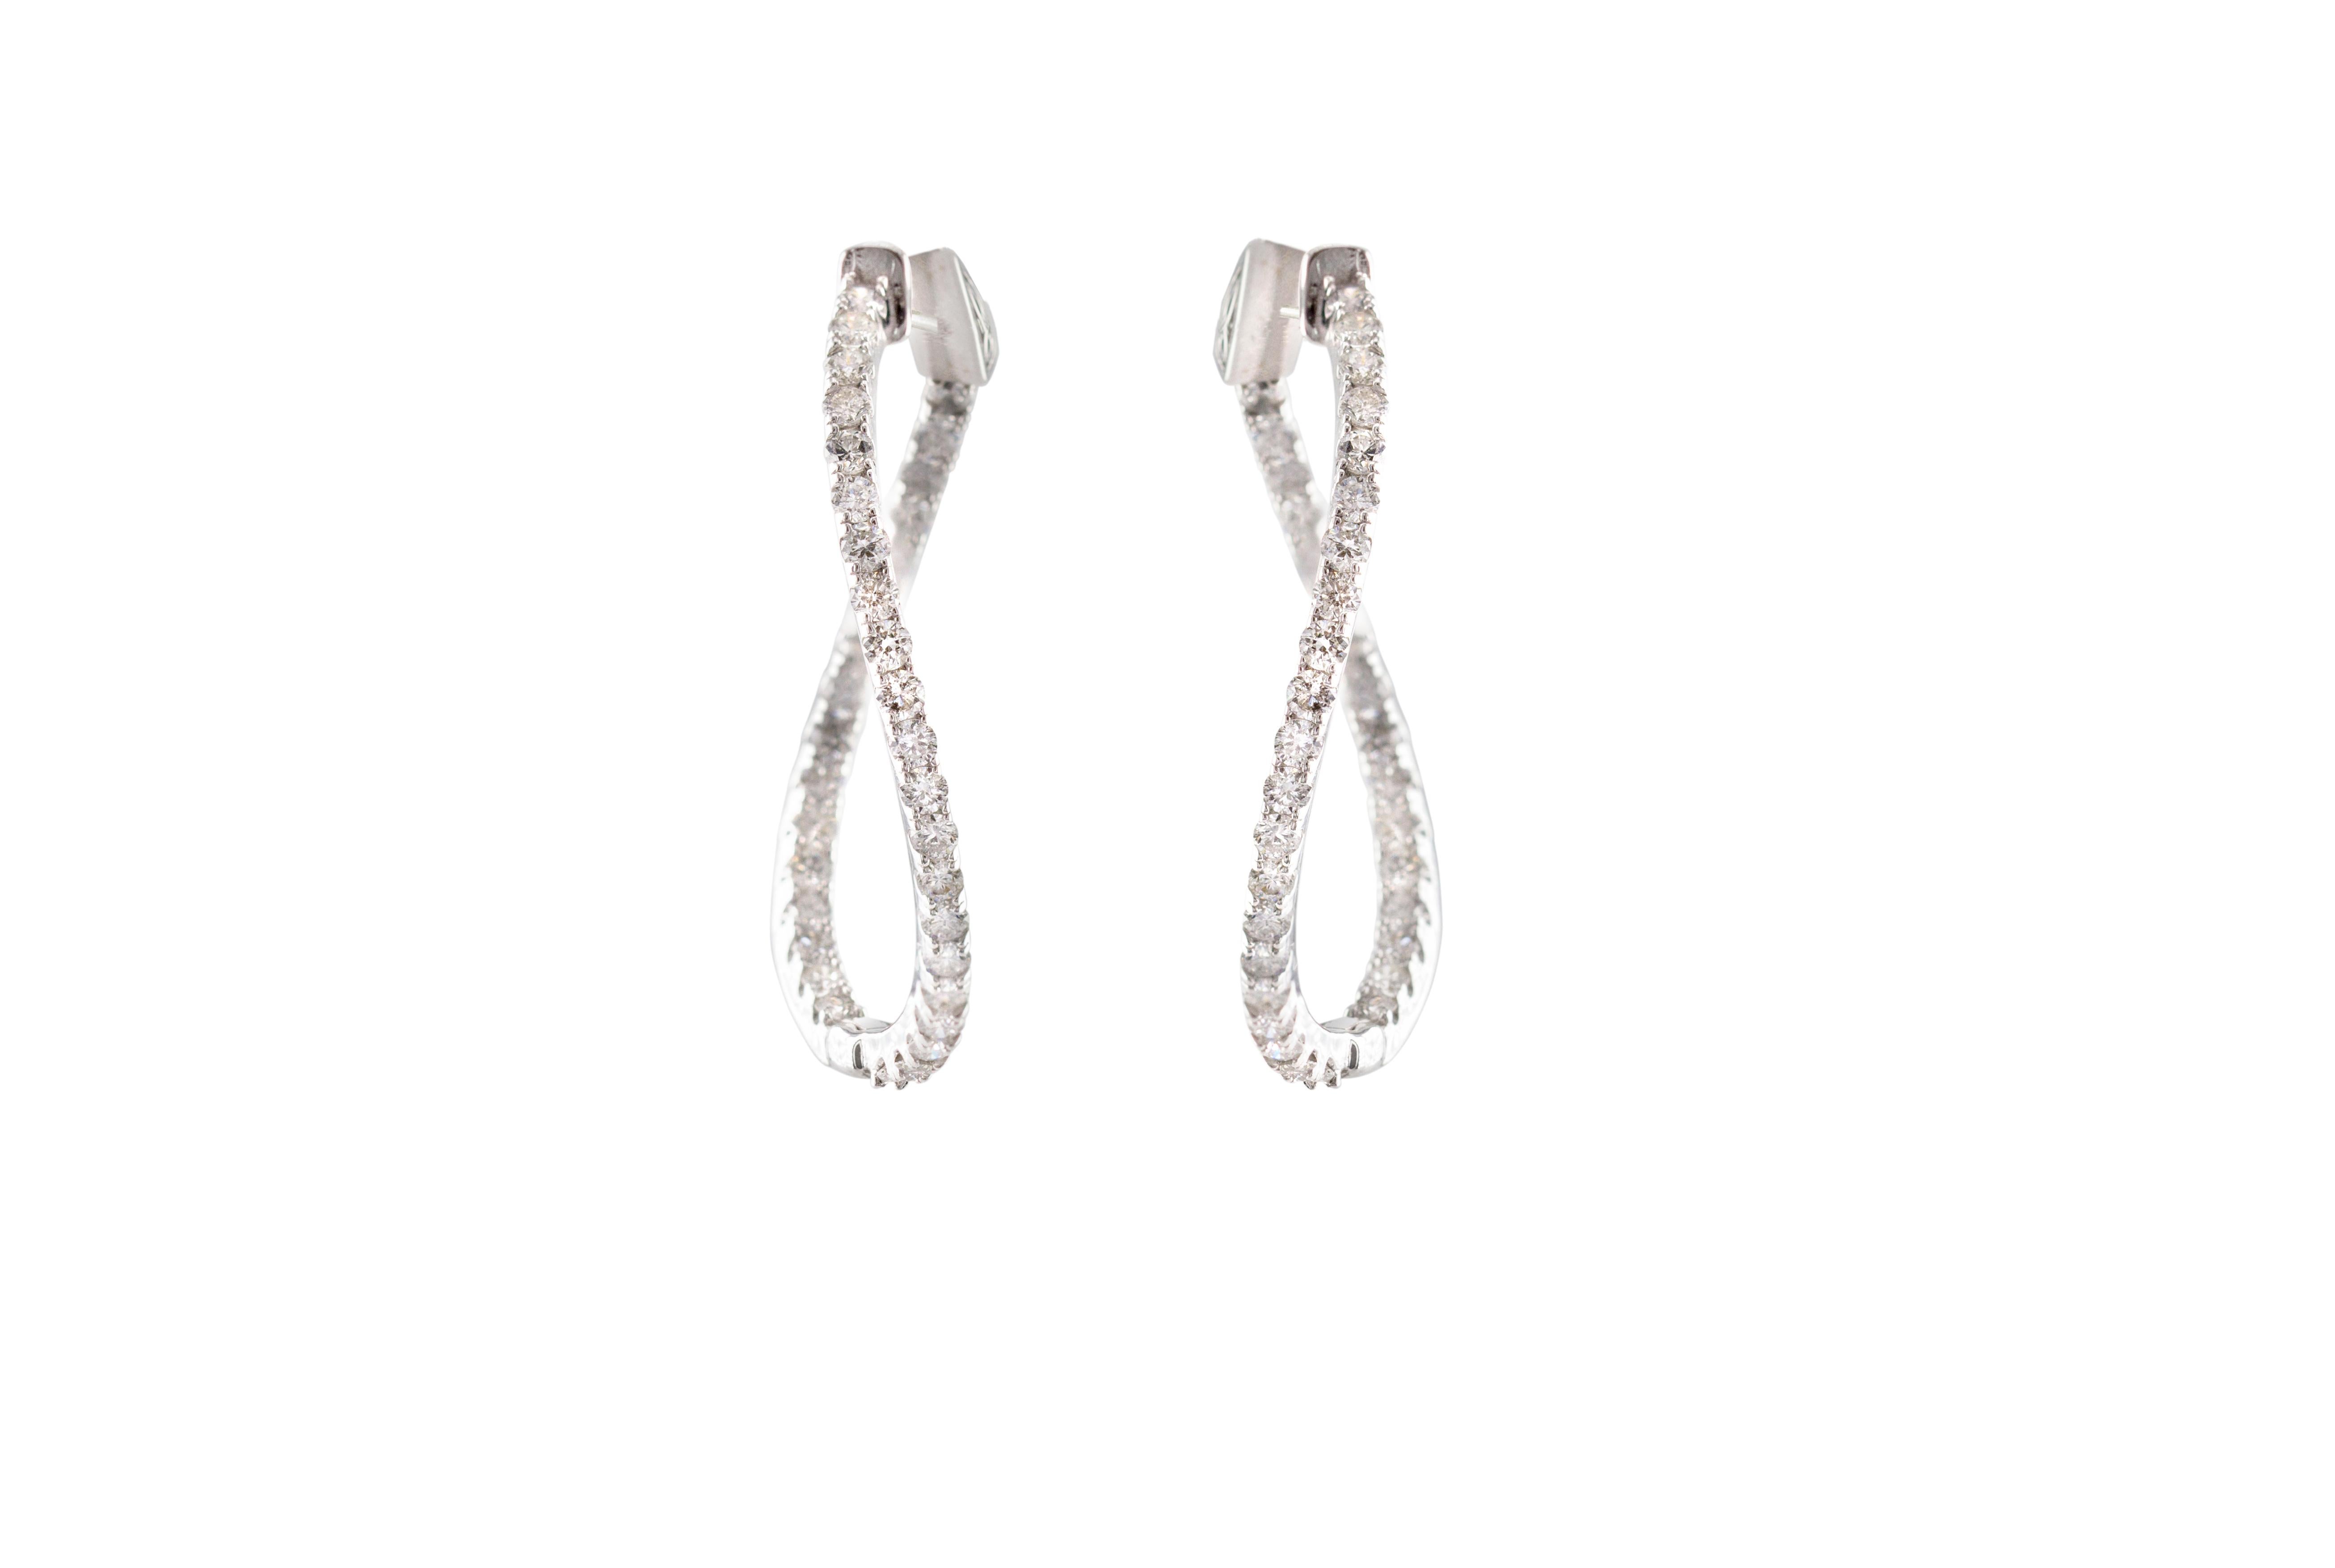 Embrace the allure of these exquisite hoop earrings that offer a delightful twist on the classic style, featuring 1.8 carats natural round diamonds. At first glance, you'll recognize the timeless beauty of hoop earrings, but upon closer inspection,